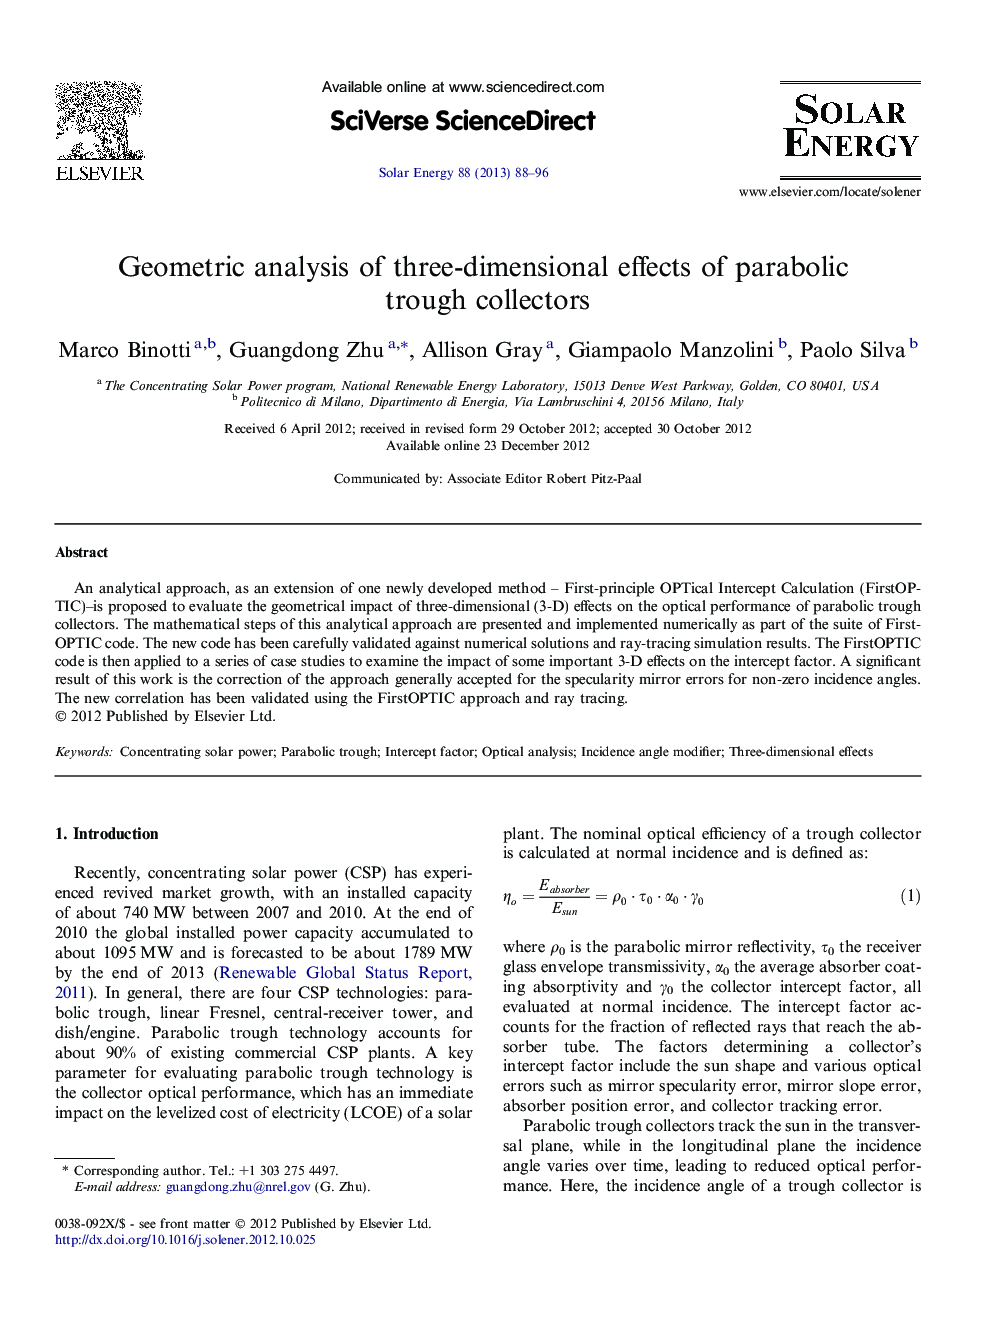 Geometric analysis of three-dimensional effects of parabolic trough collectors